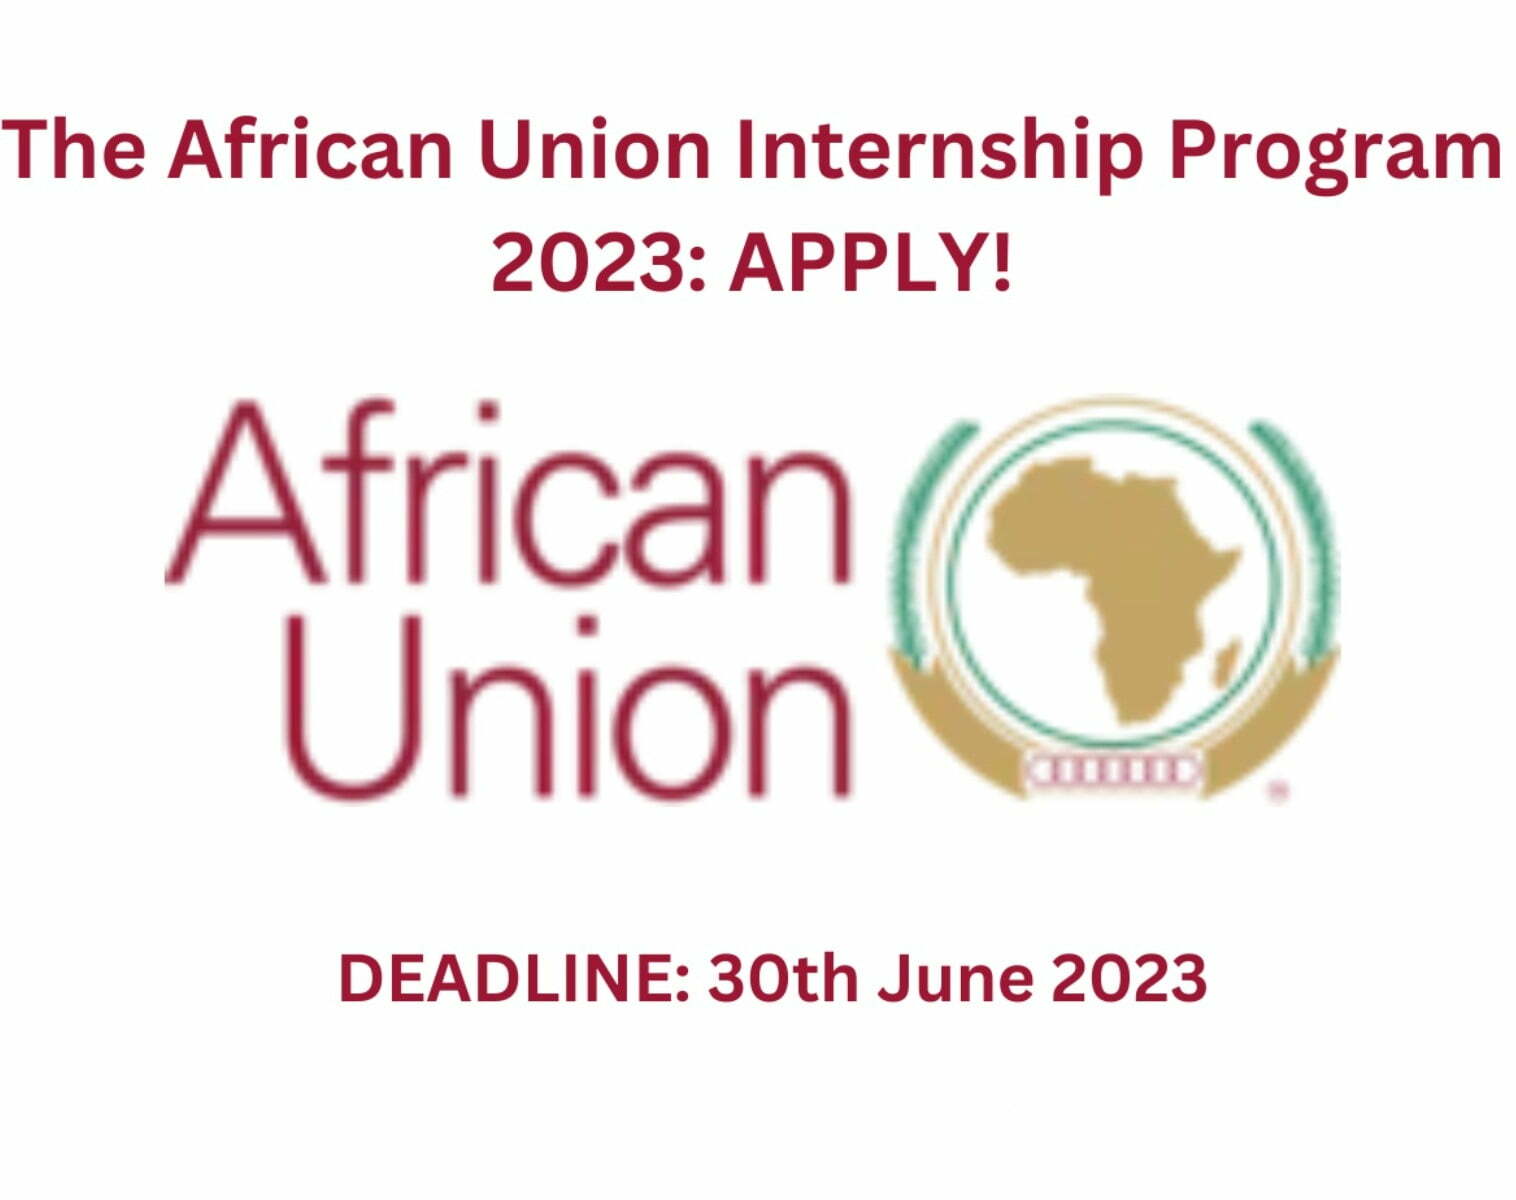 African Union Commission Internship Program 2023 for Africans